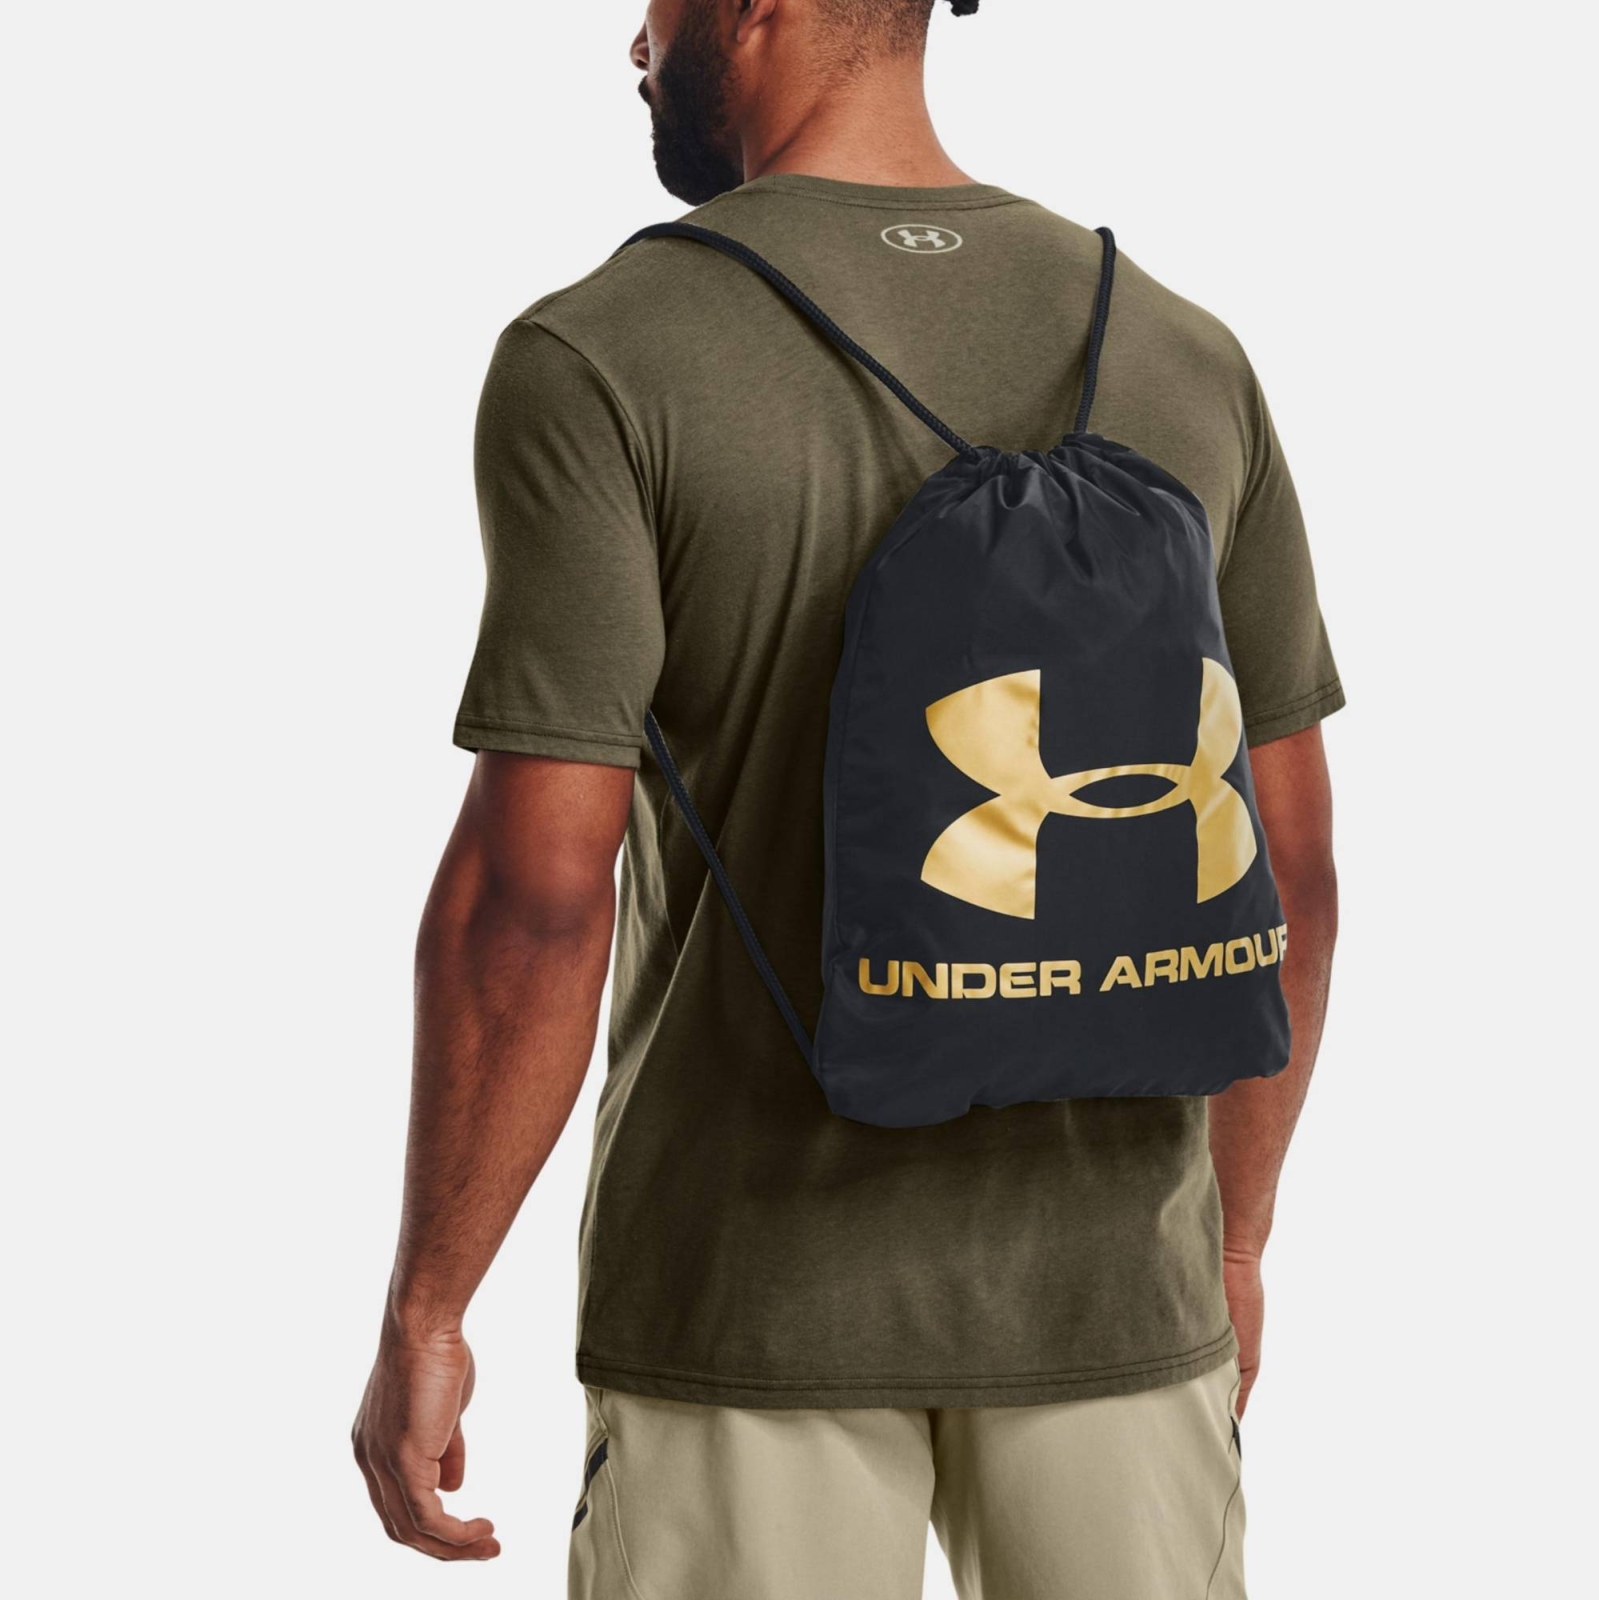 UNDER ARMOUR SEE SACKPACK